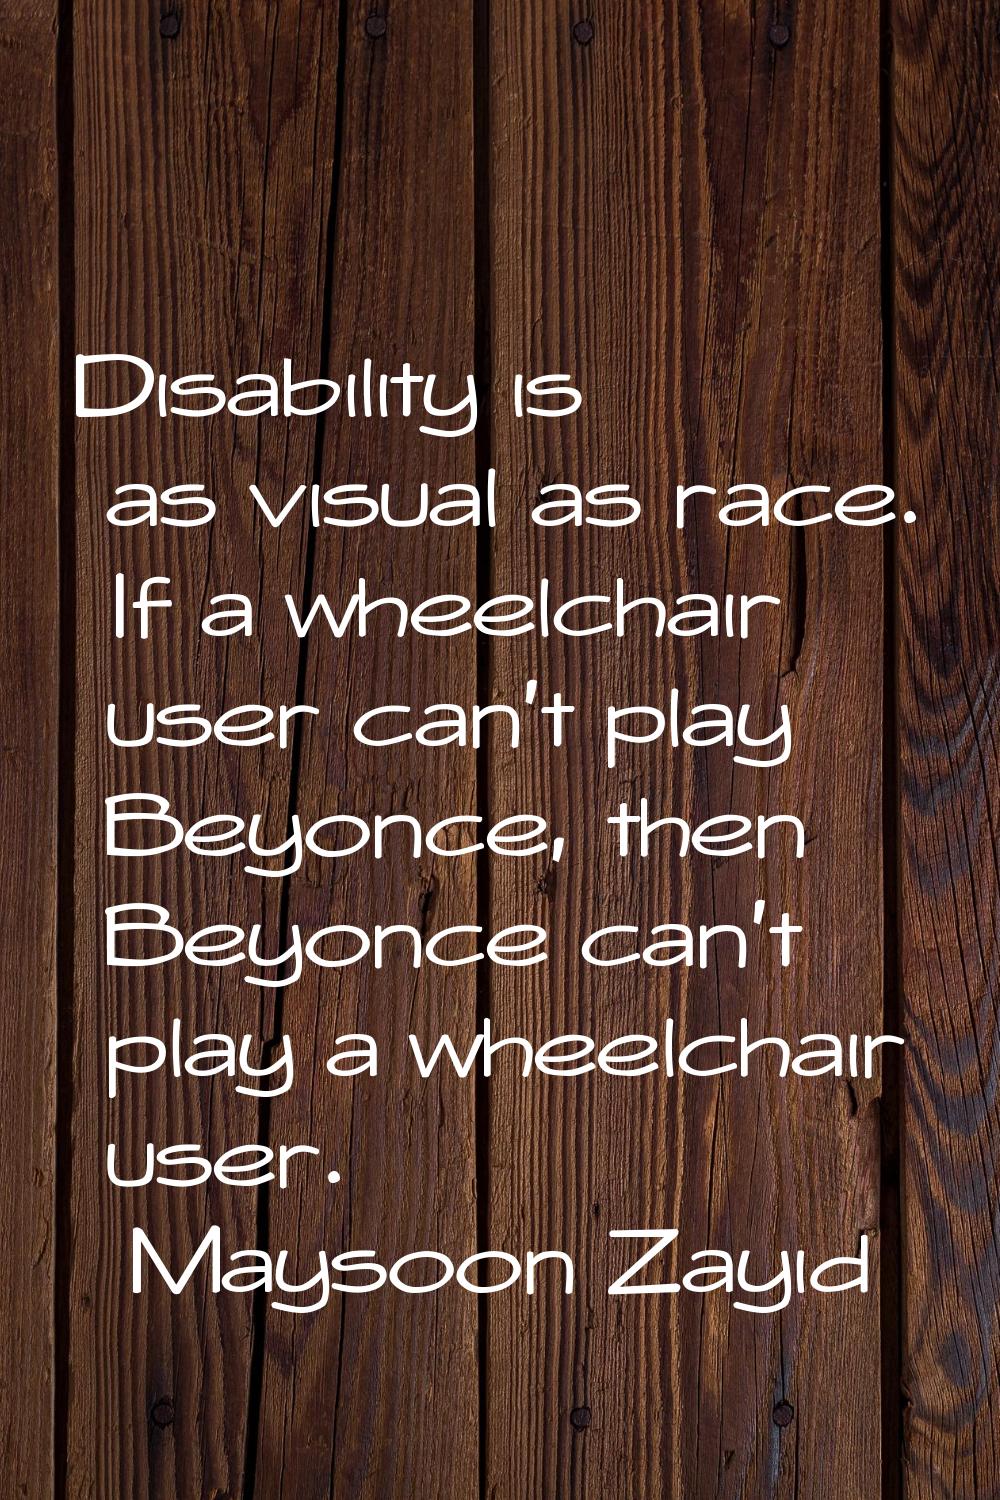 Disability is as visual as race. If a wheelchair user can't play Beyonce, then Beyonce can't play a